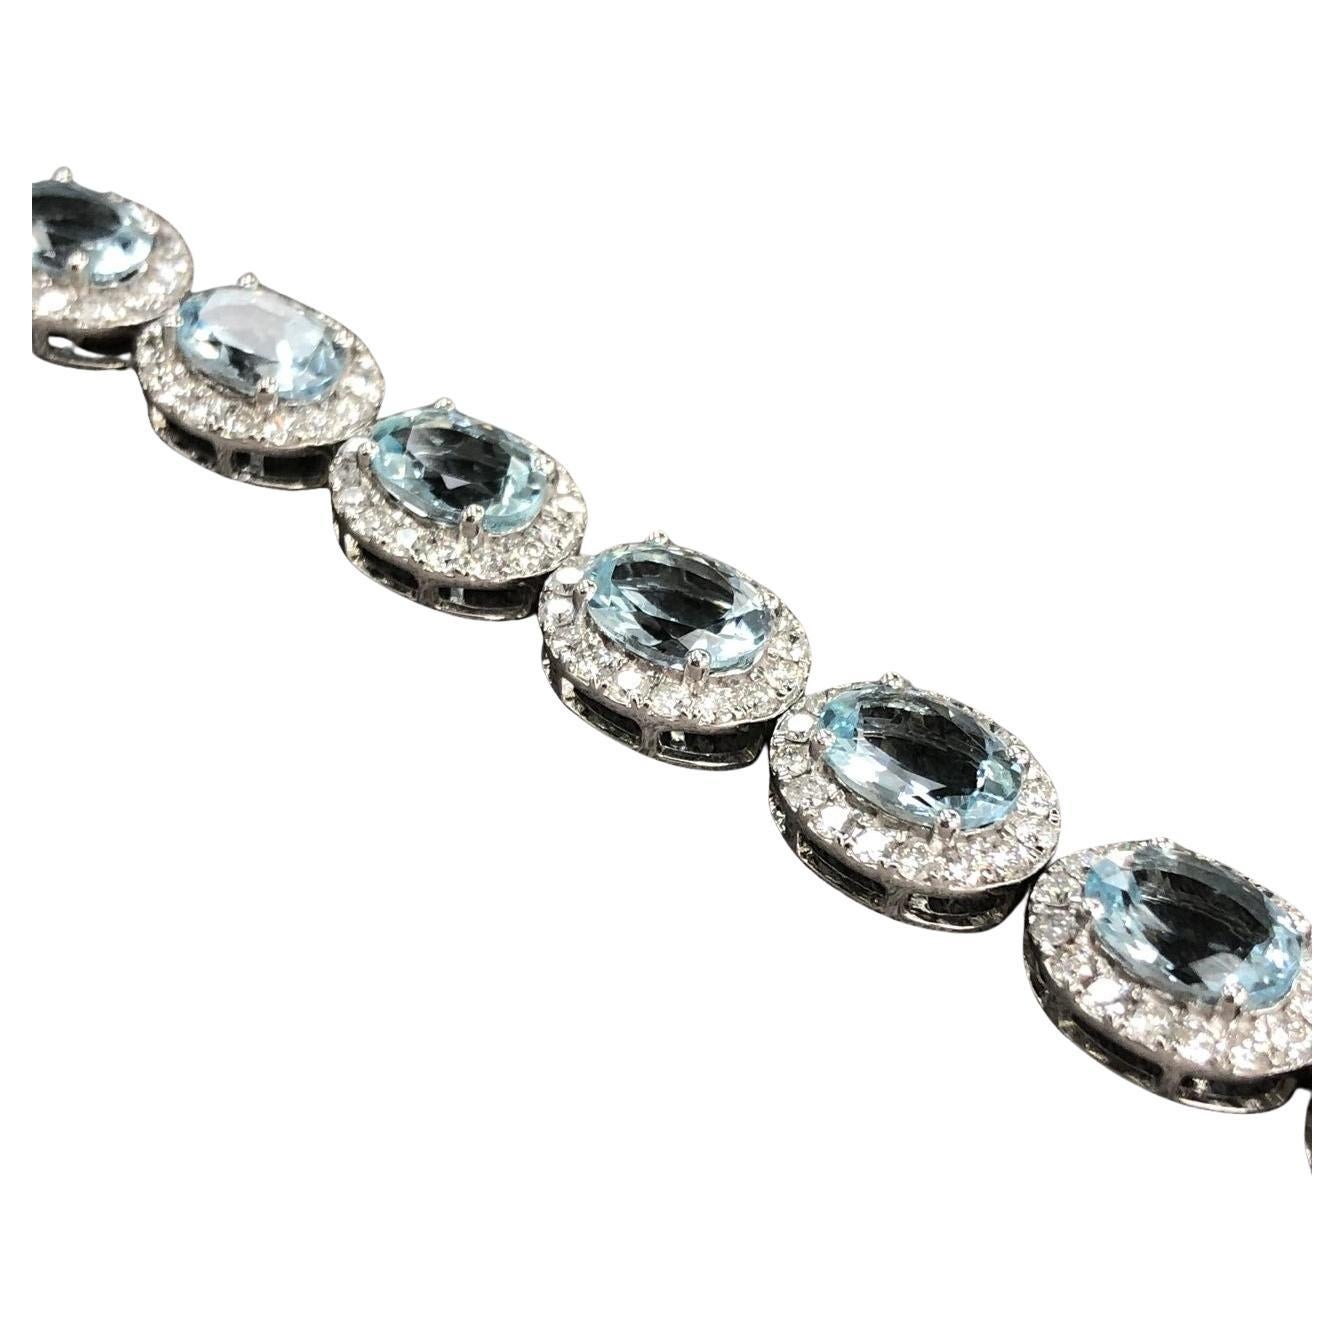 Introducing the epitome of elegance, the 15.58ct Oval Aquamarine and Diamond Halo Bracelet, a dazzling masterpiece in 18kt White Gold. This bracelet features enchanting oval-shaped Aquamarines with a total weight of 12.41ct, radiating a captivating